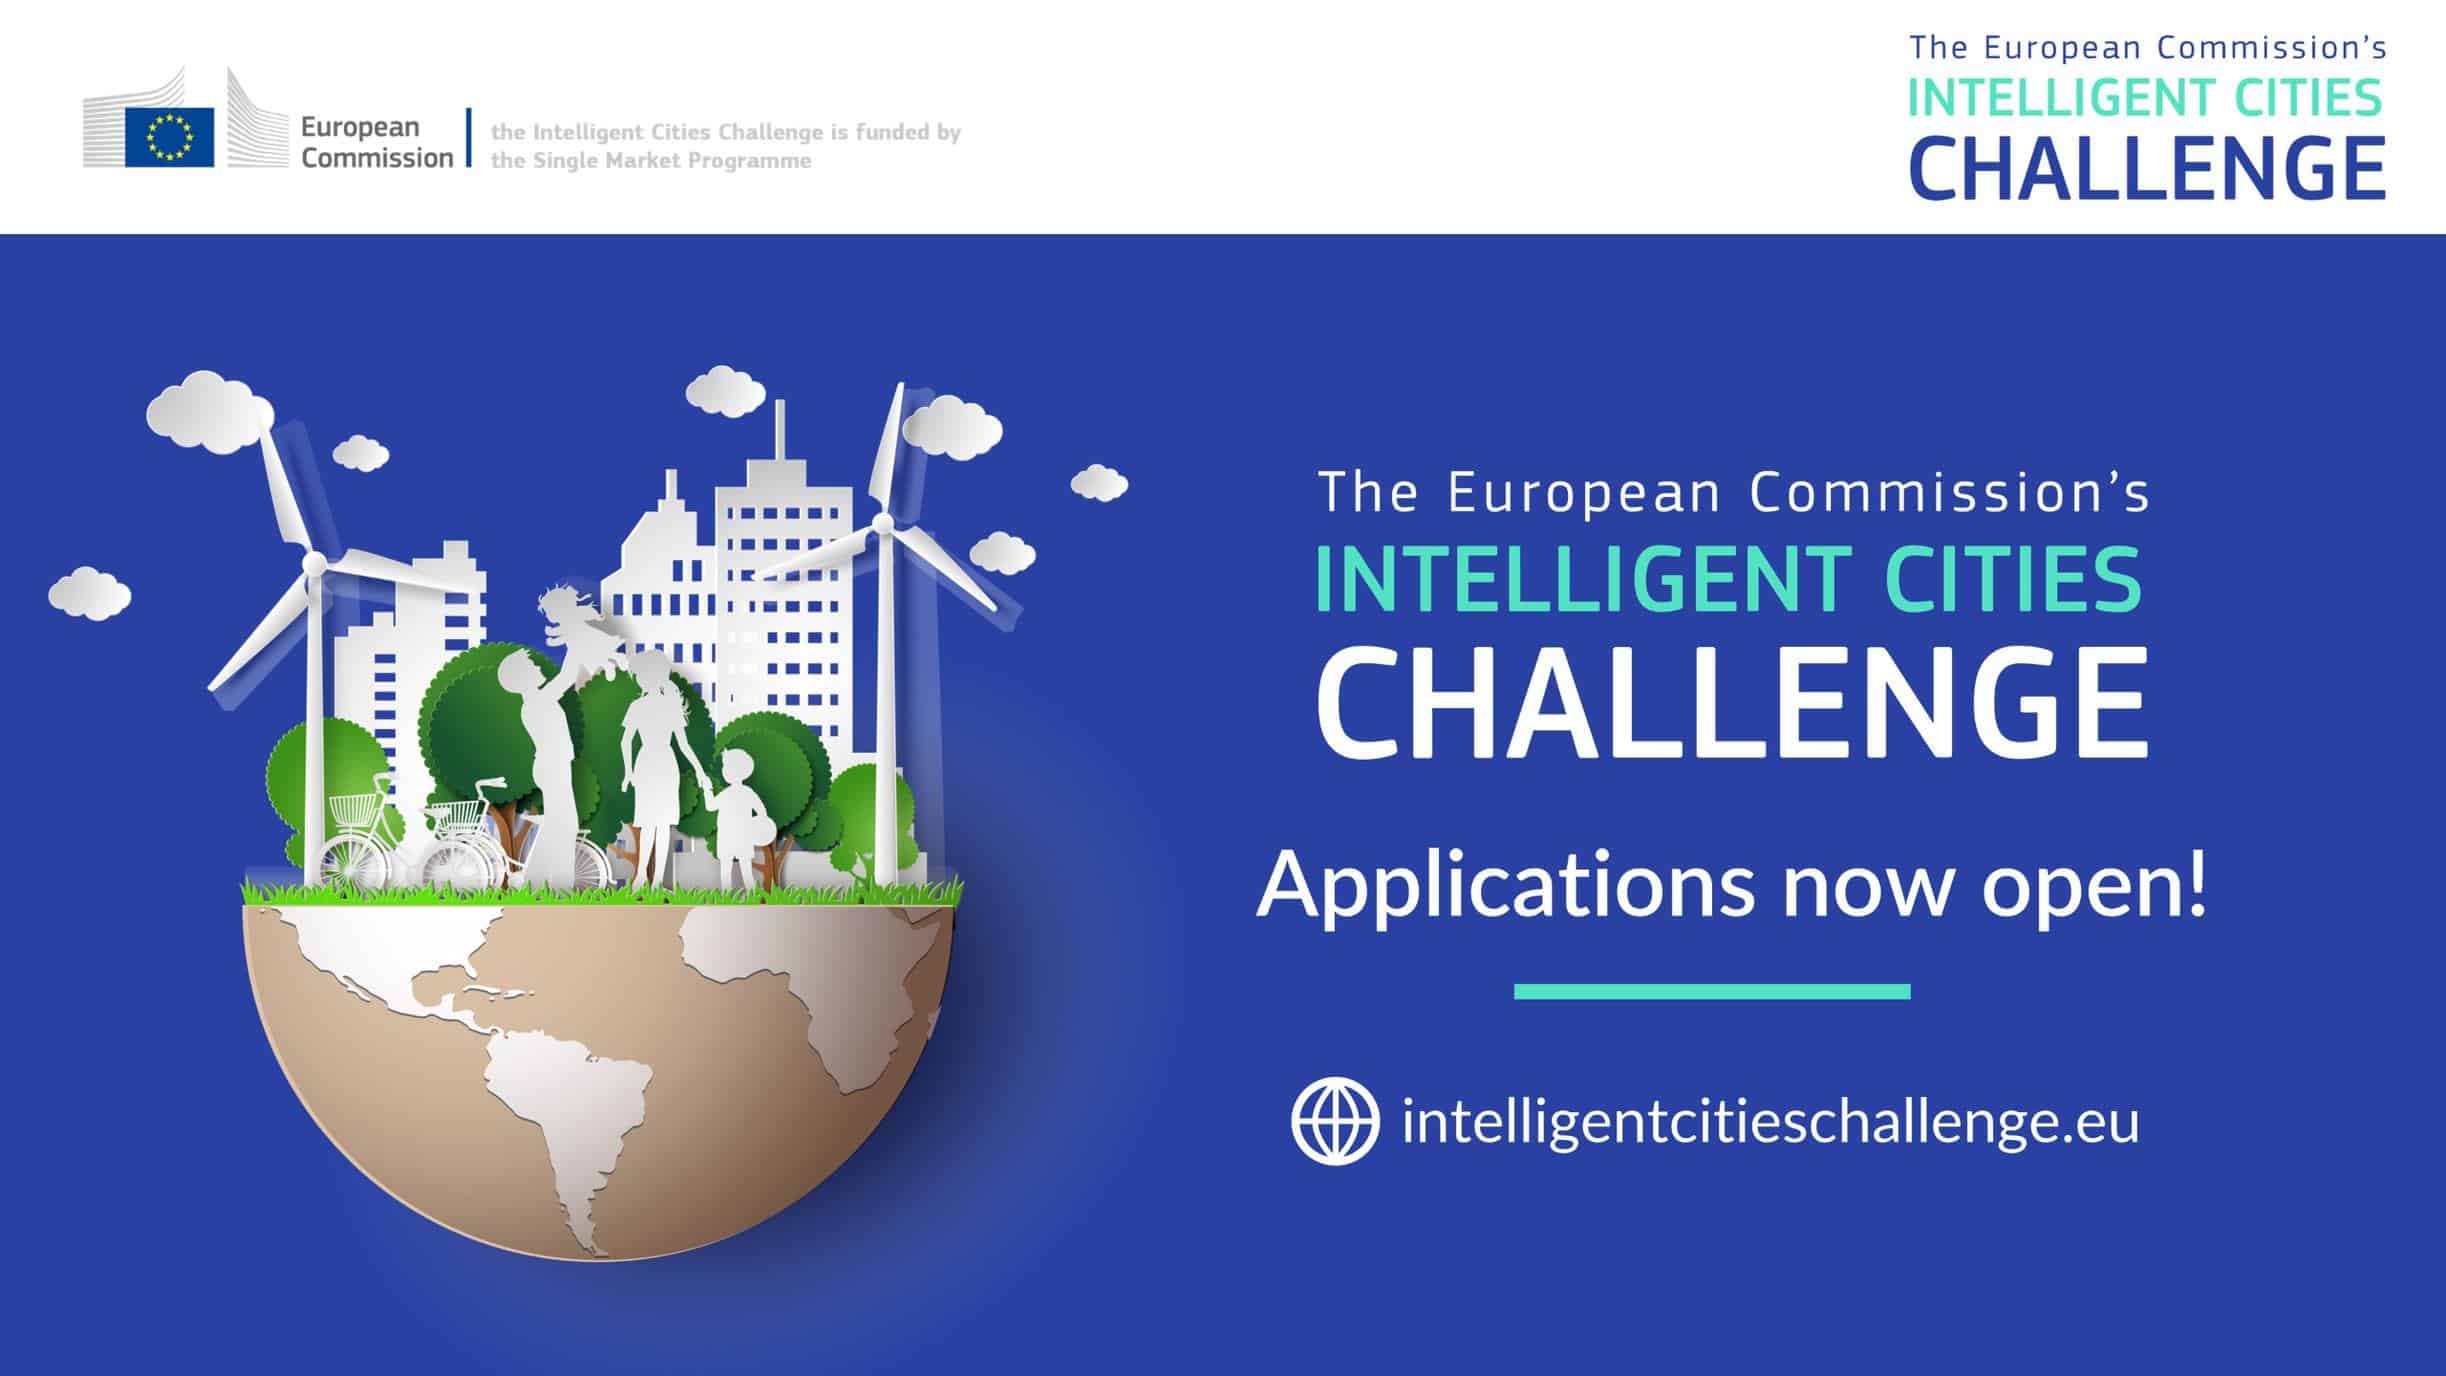 Launch of the second phase of the Intelligent Cities Challenge